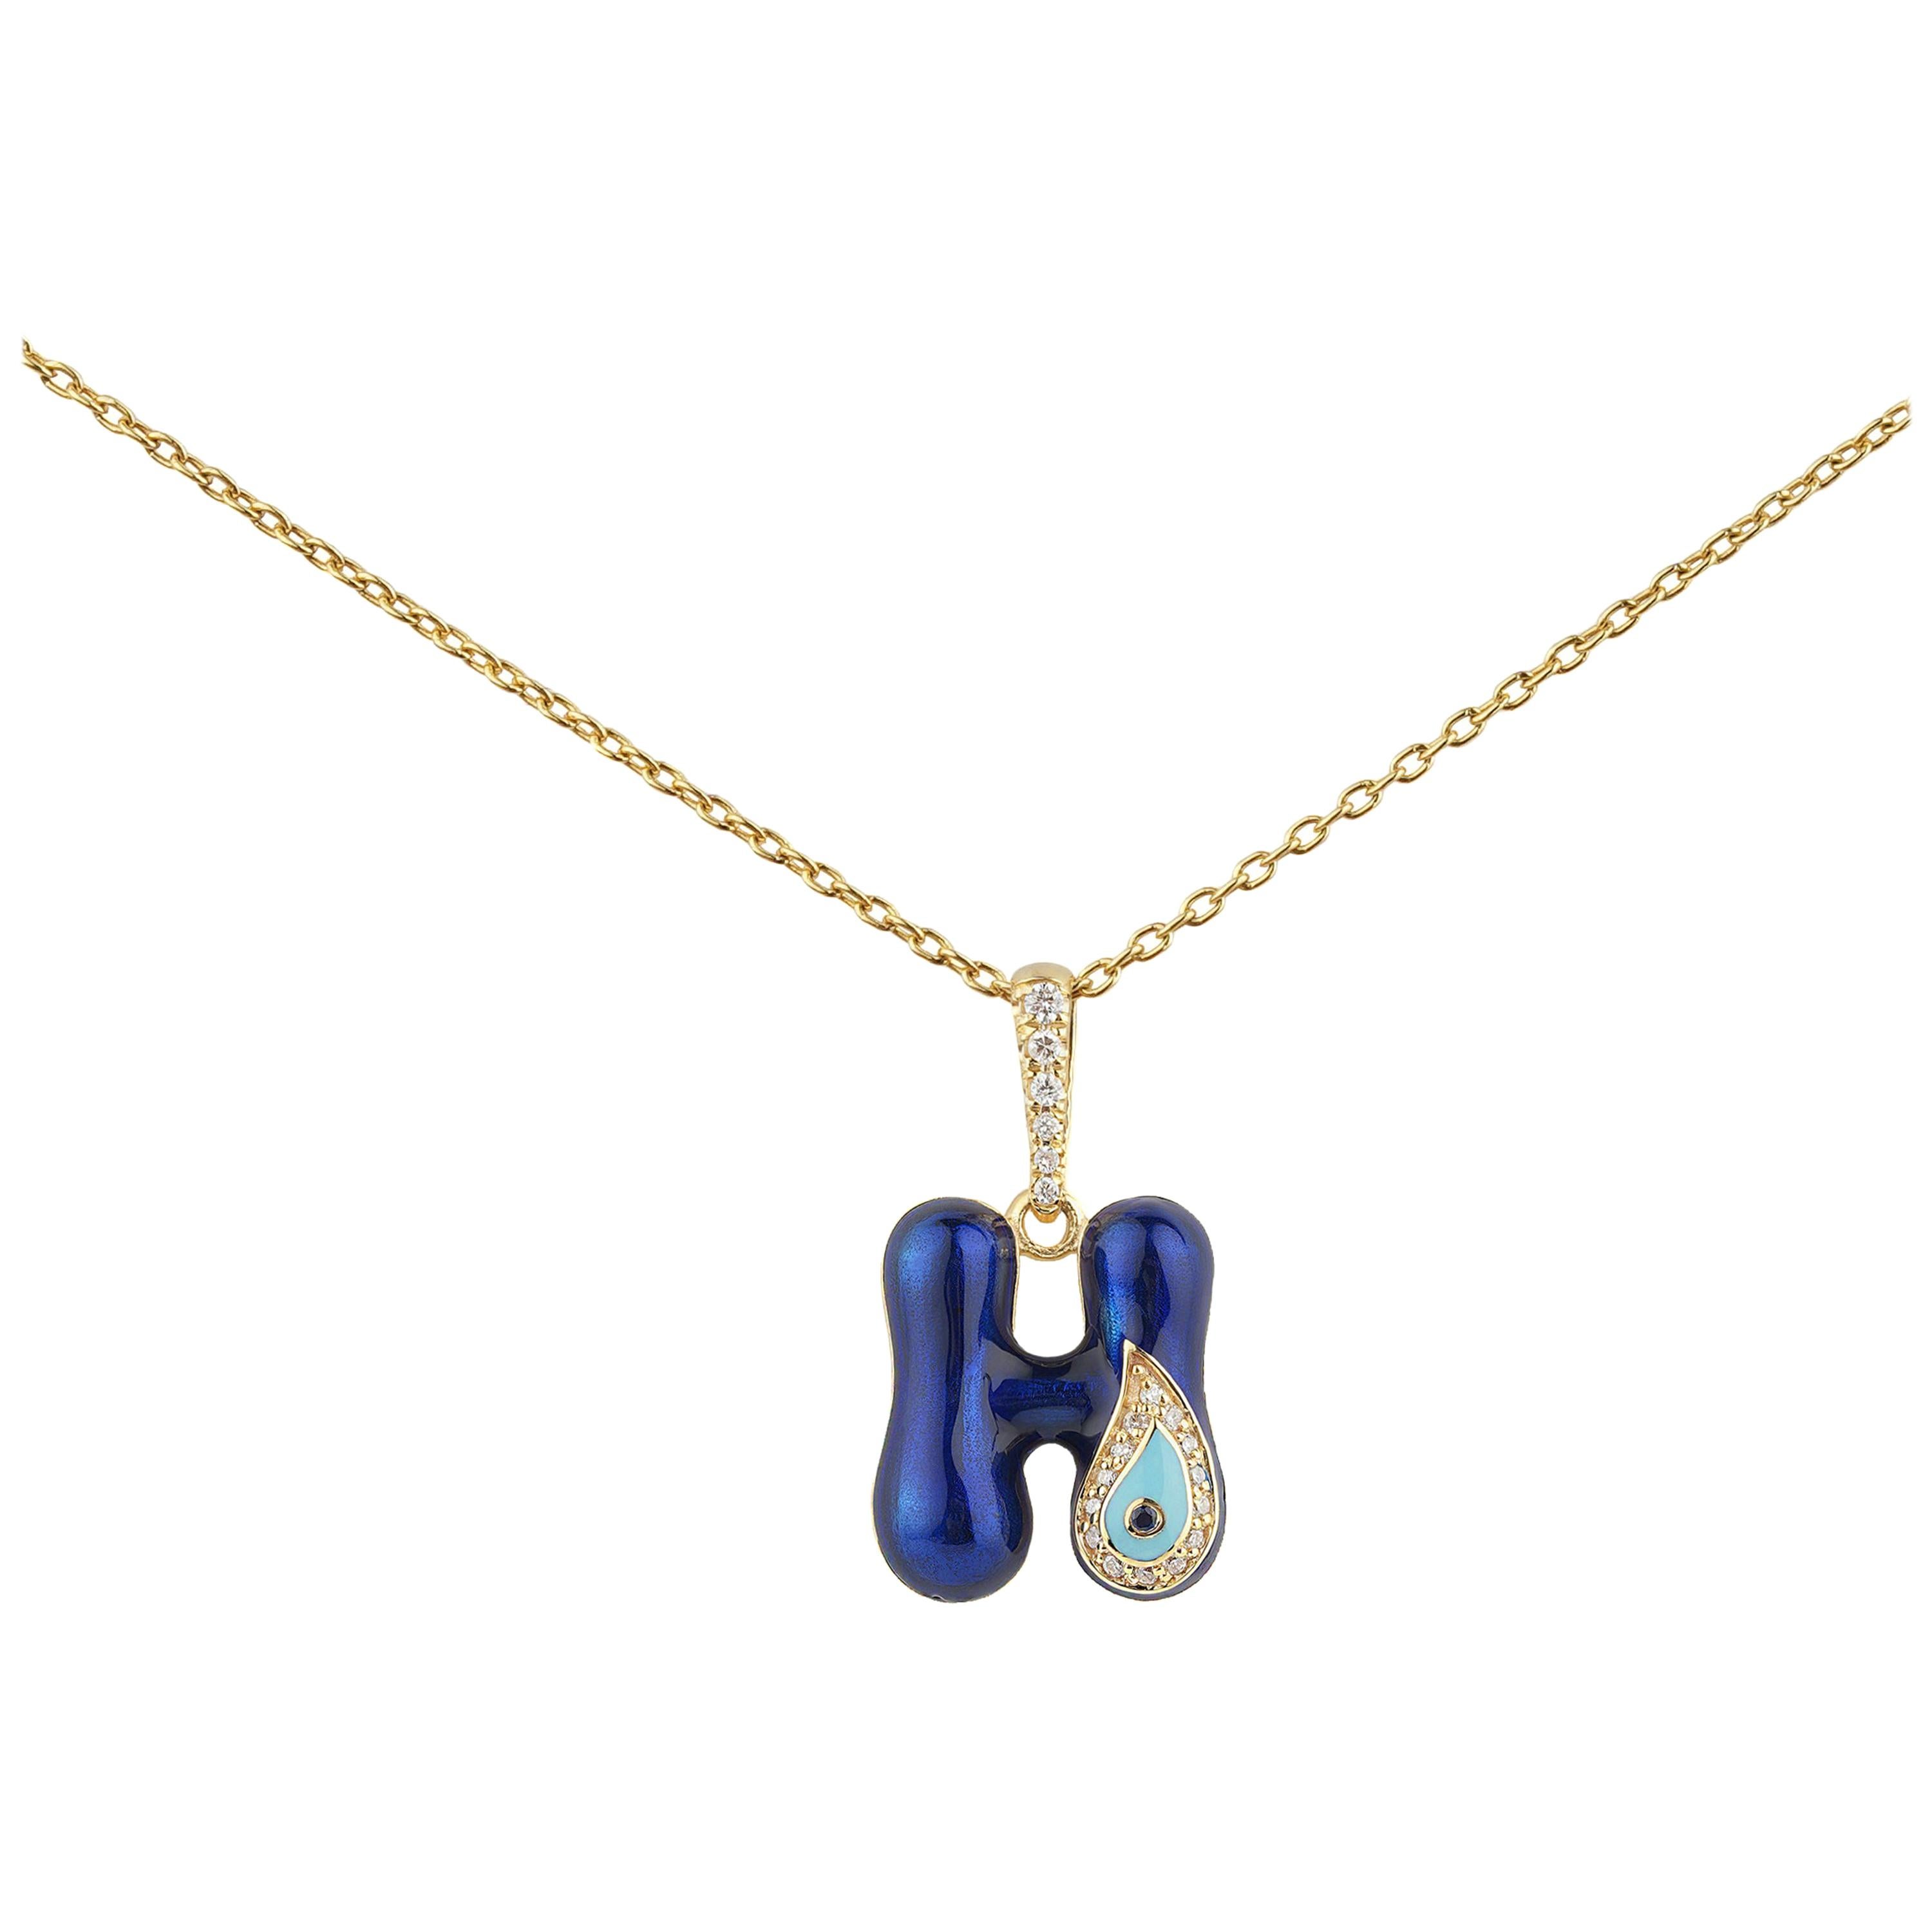 Best Christmas Gifts by Nazarlique

Evil Eye ID Initial Amulet Necklace.
When You Wear An Evil Eye Jewelry In General, You Shield Yourself From Negativity With Its Protective Qualities. 

Discover Nazarlique Evil Eye ID Collection Jewelry Designed